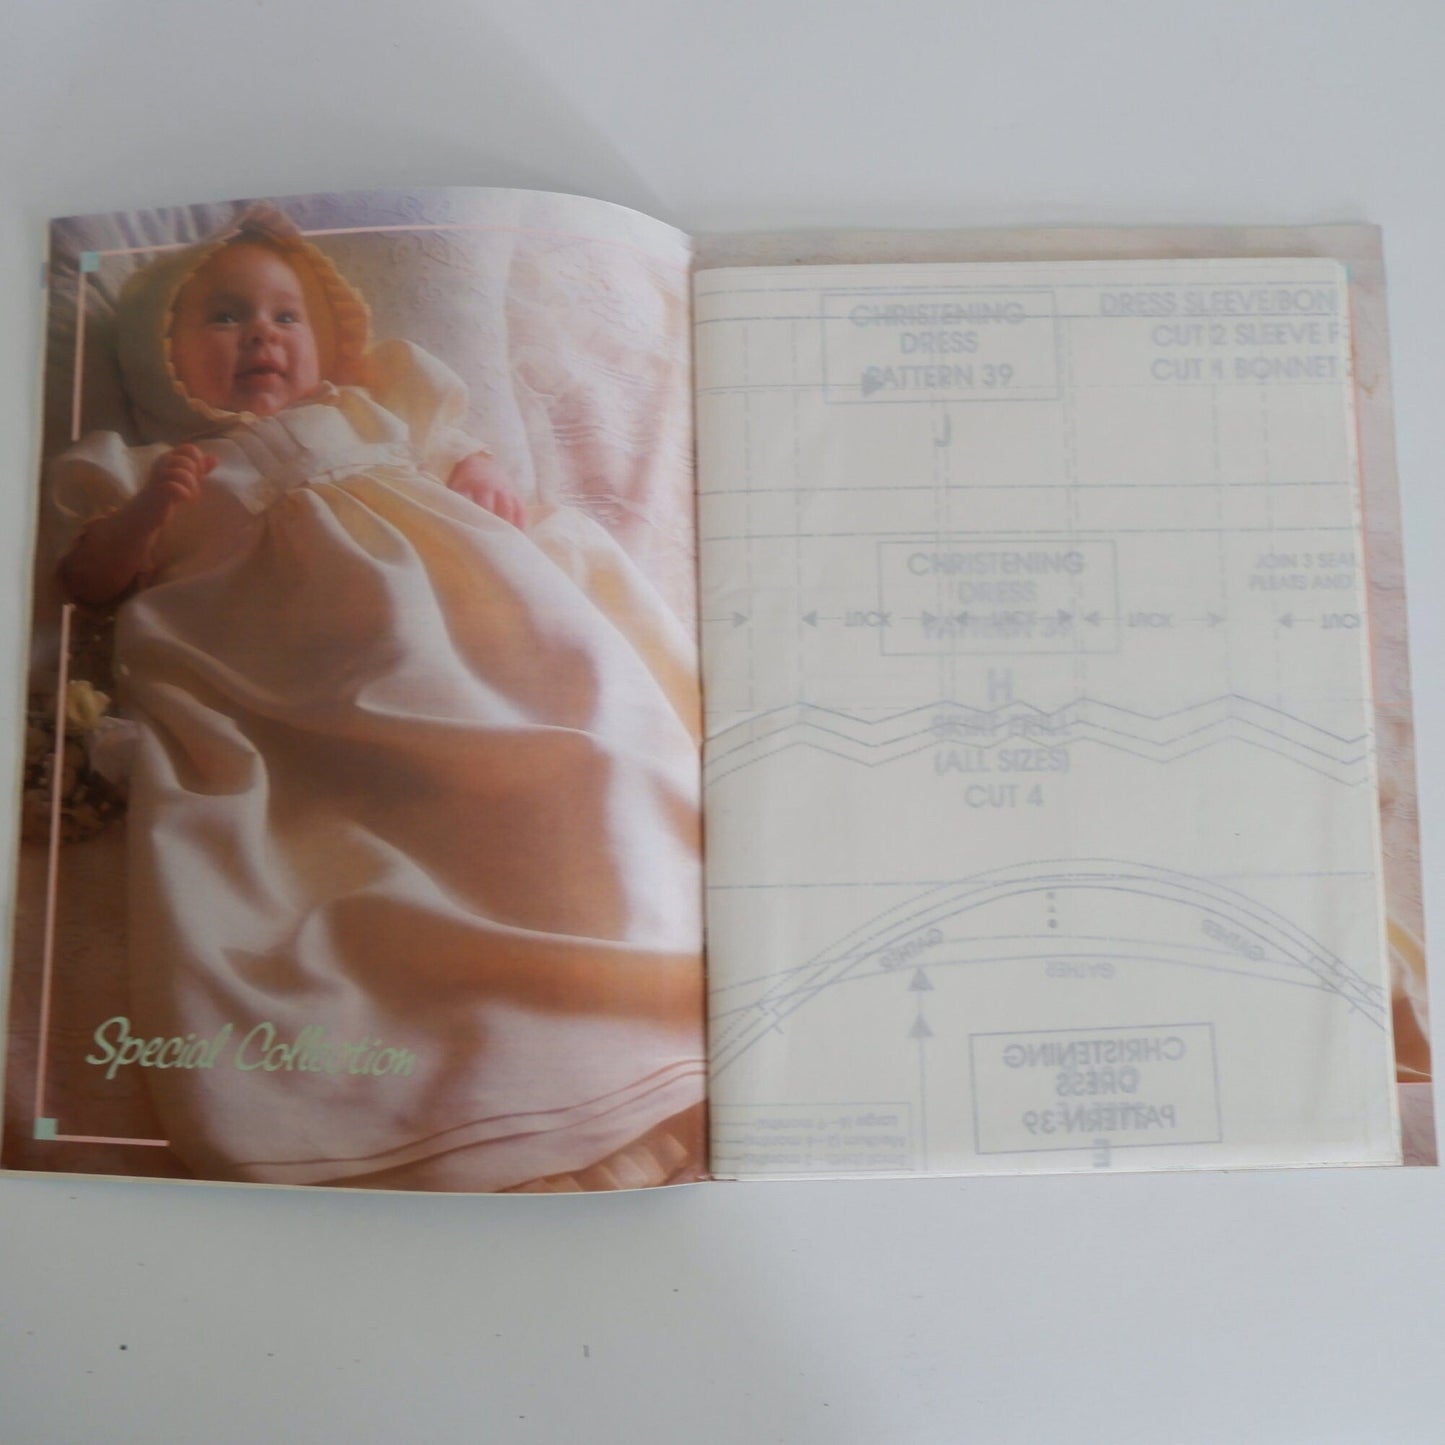 Make It Easy Special Collection 39, Baby Christening dress Matinee jacket Bonnet Romper and Bag pattern